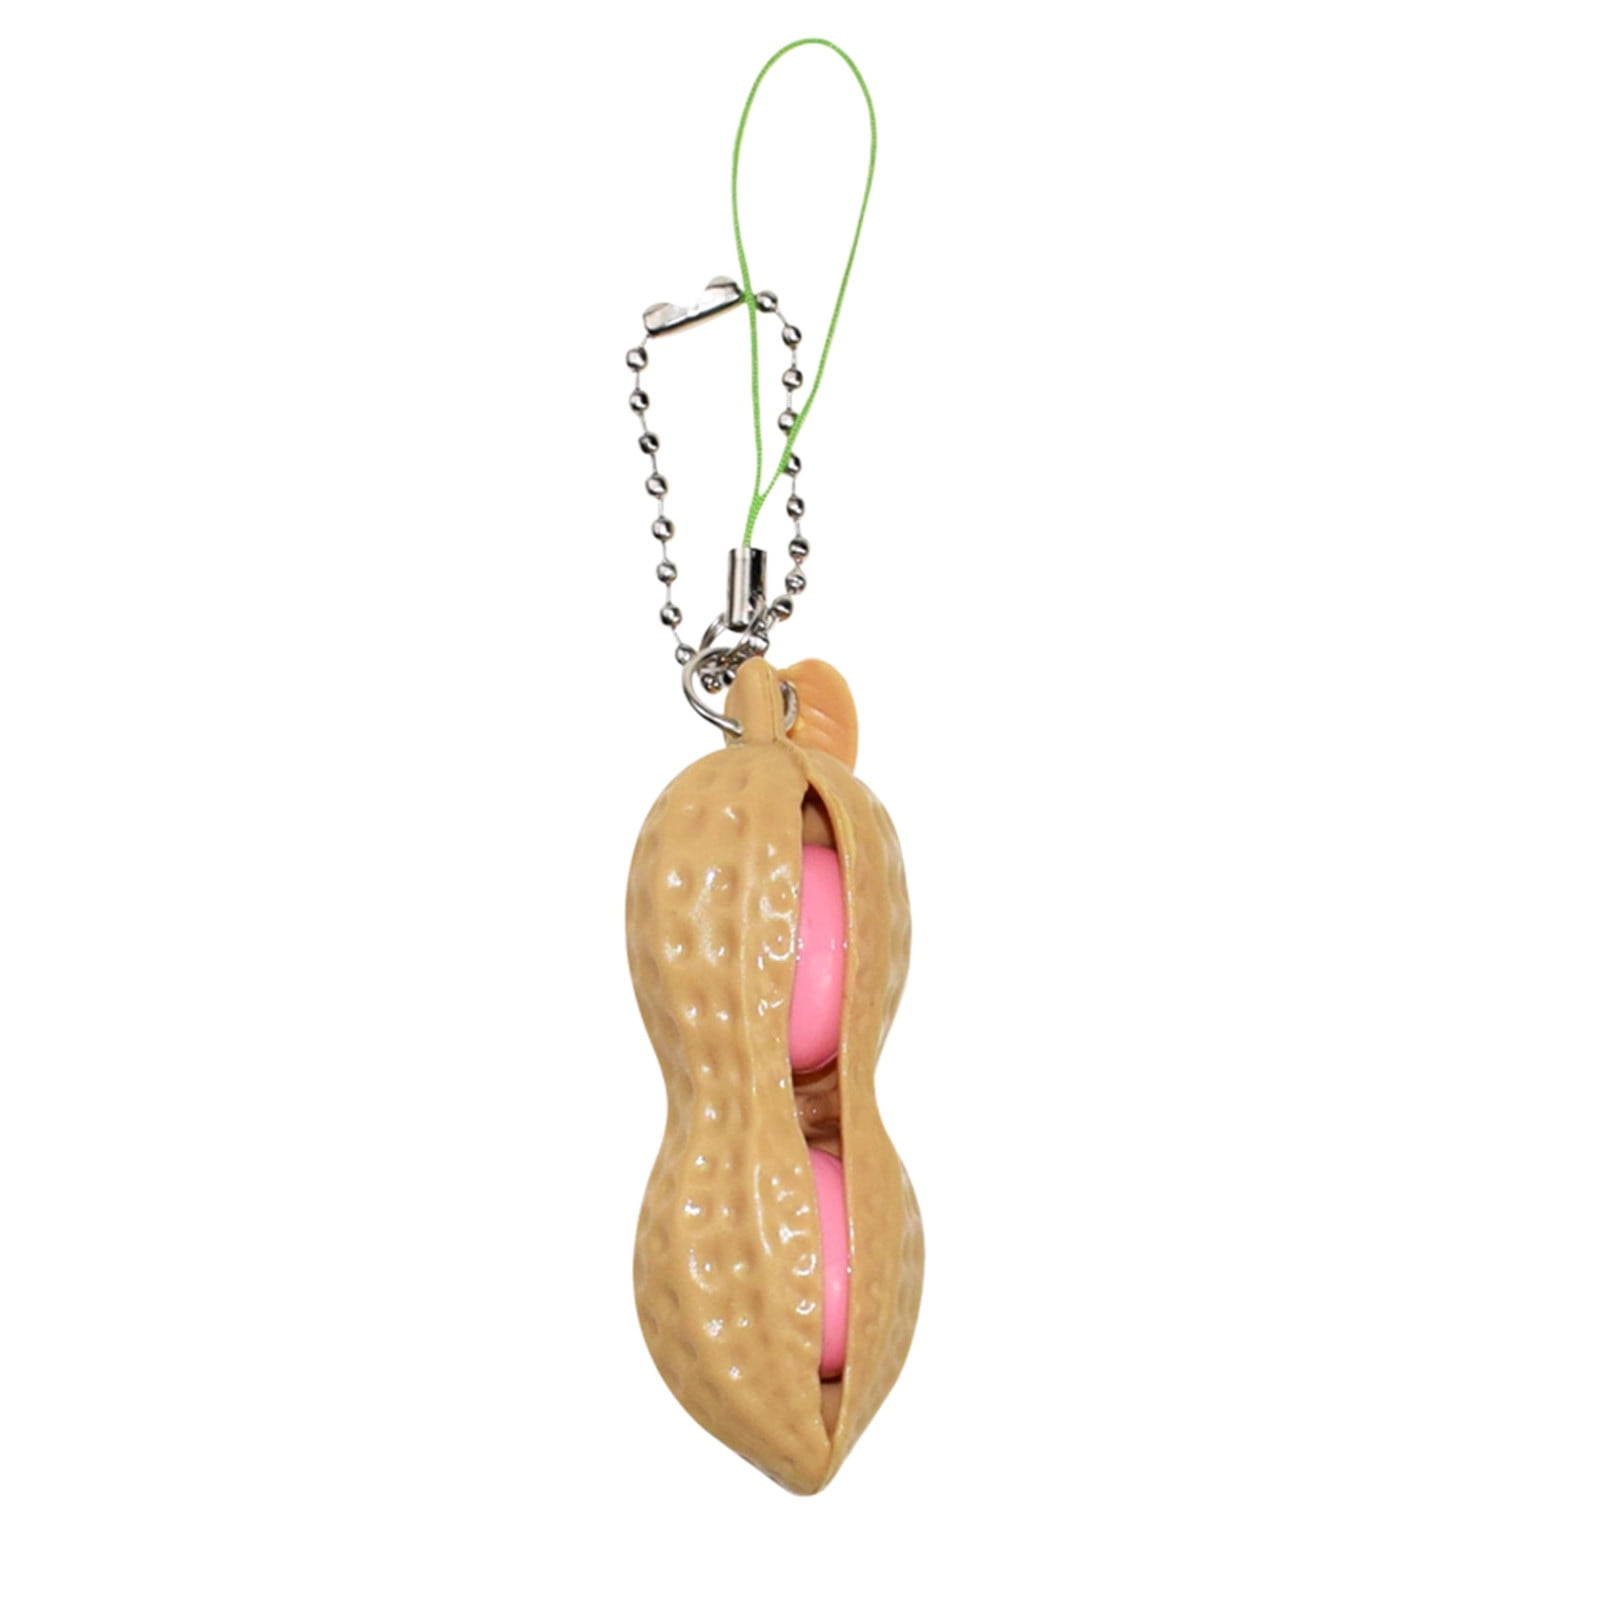 Peanut Soy Toy Key Chain Stress Relief Peanut Soybean Key Chain Toy Sensory Toy Chain Pendant Mobile Phone Key Backpack Present Toy 5 Pieces Mini Funny Peanut Bean Handheld Toy